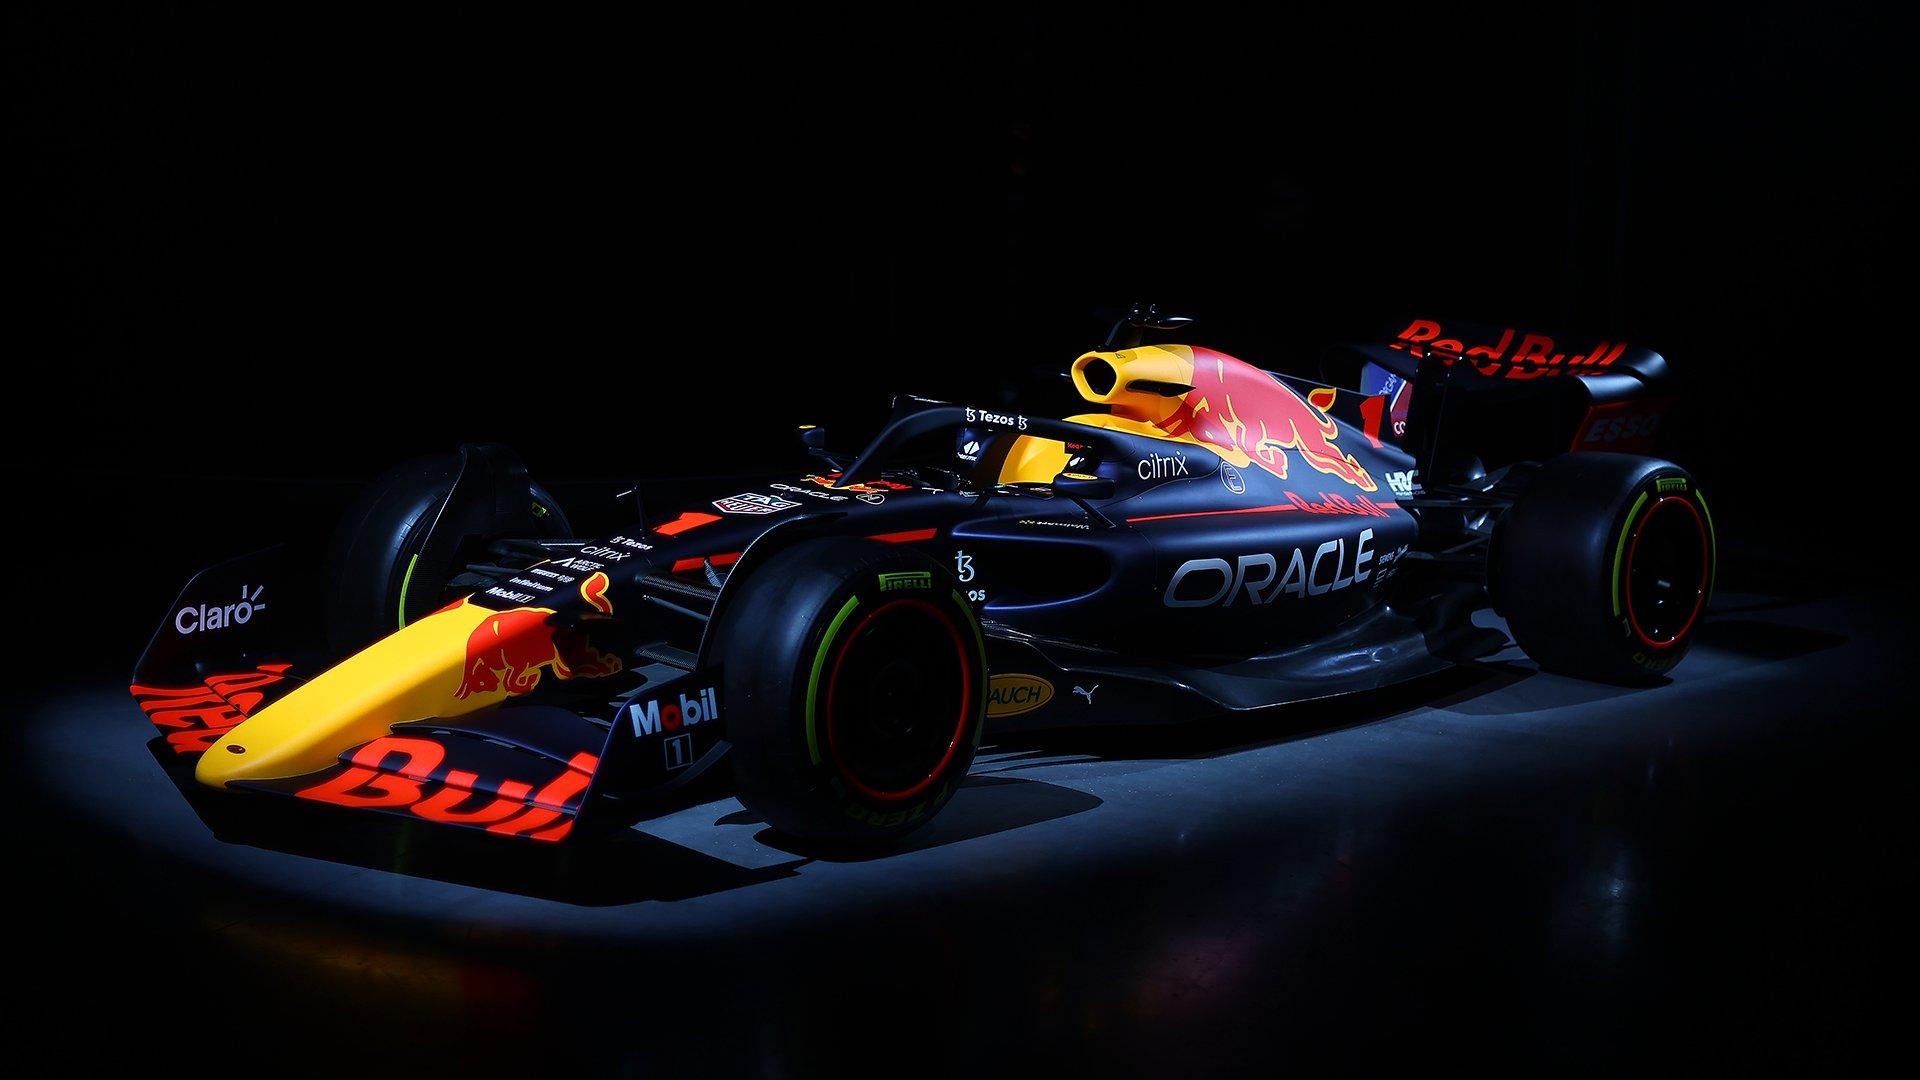 This is the F1 car that defending world champion Max Verstappen will